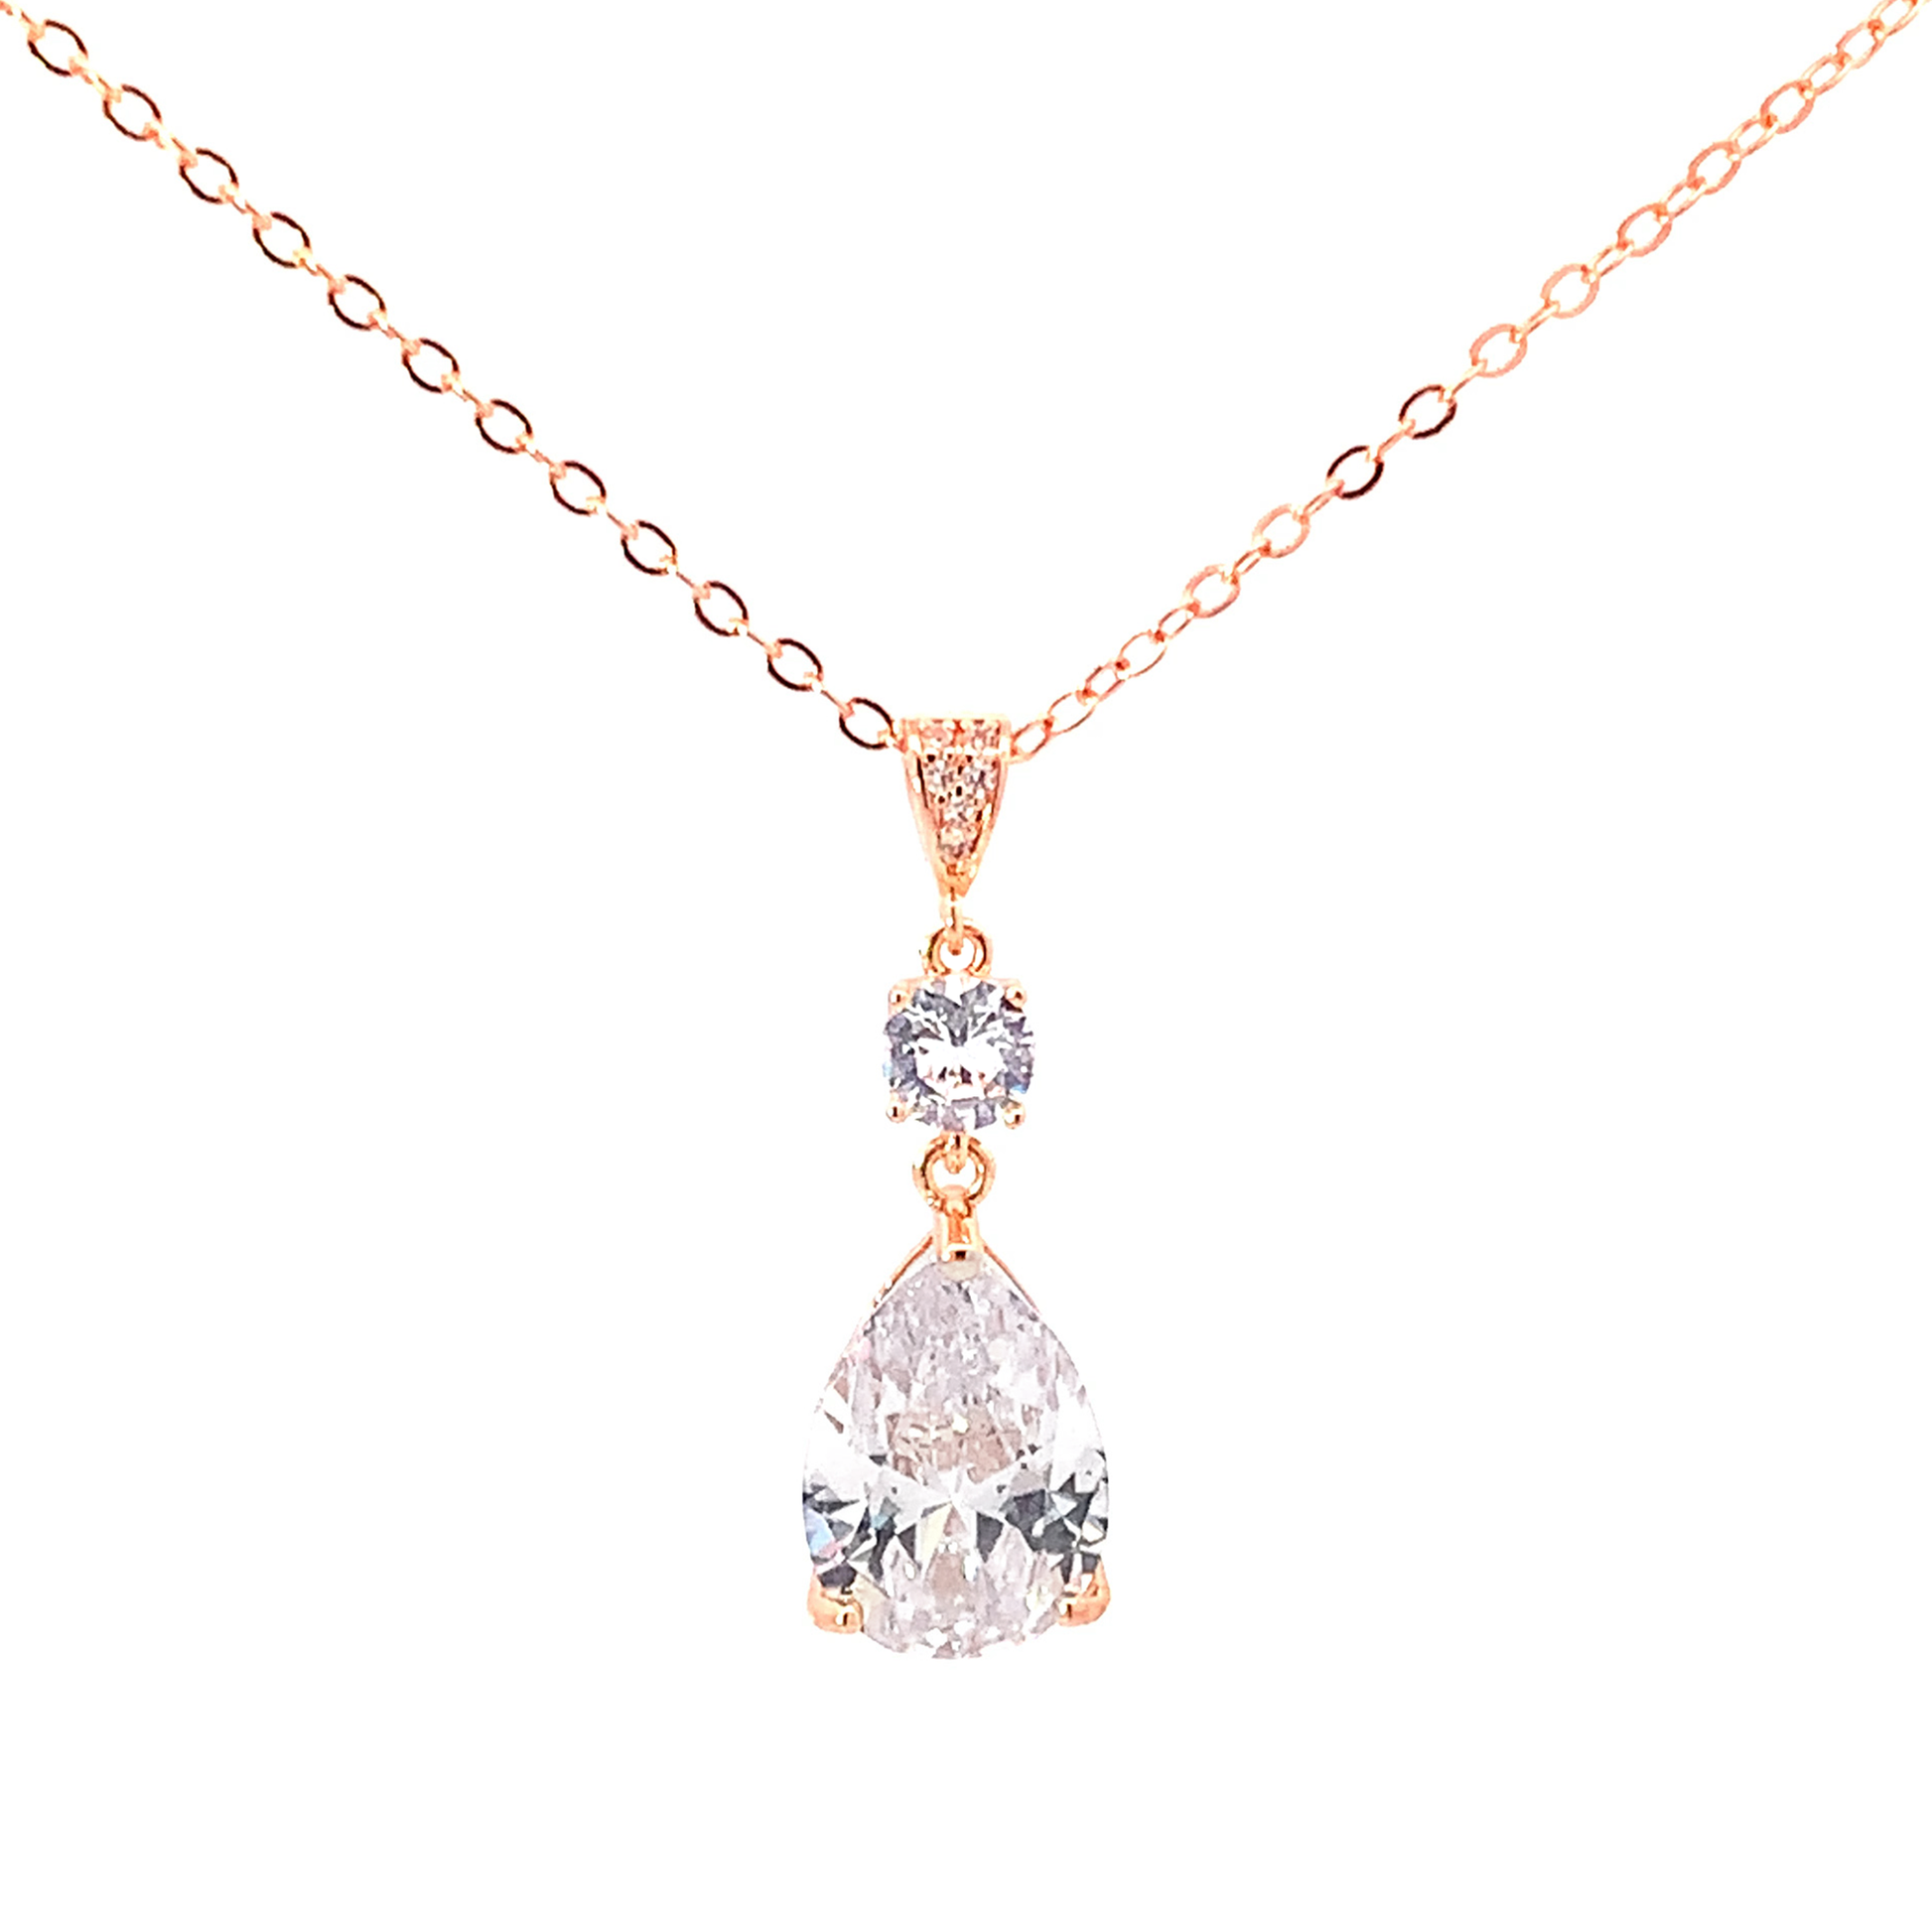 Crystal pear bridal pendant necklace rose gold